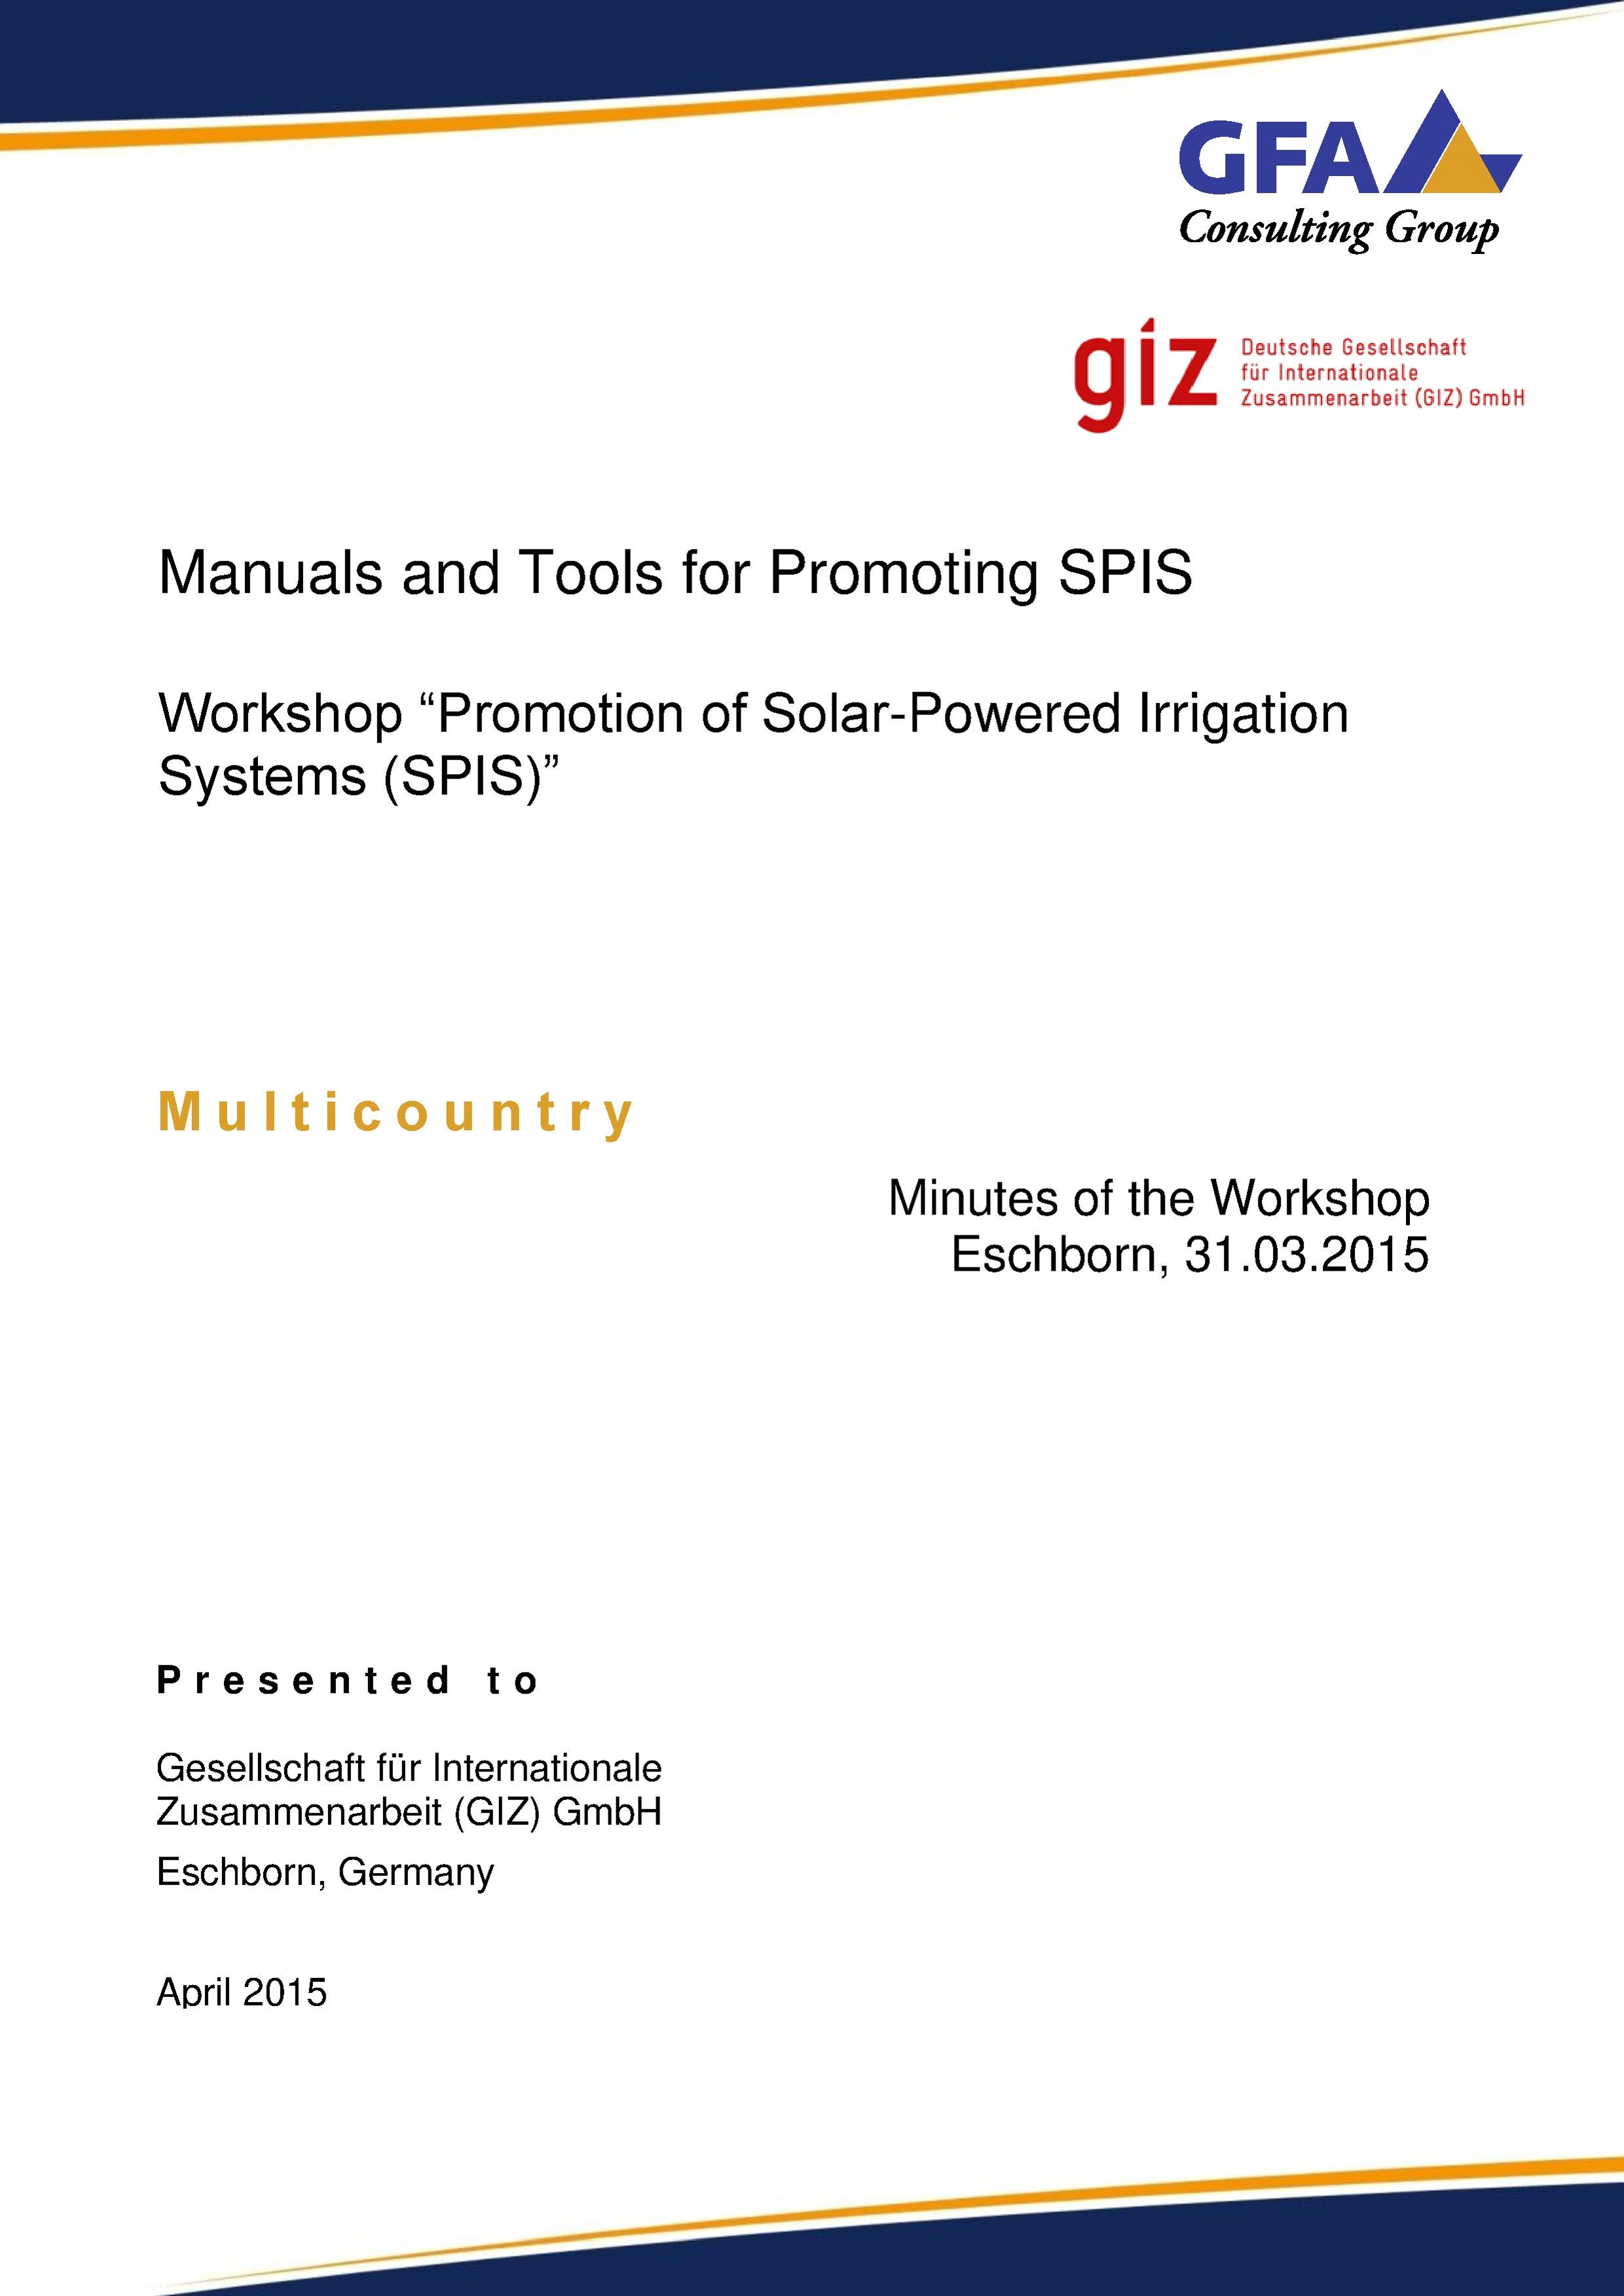 File:Manuals and Tools for Promoting SPIS - Minutes of the Workshop.pdf